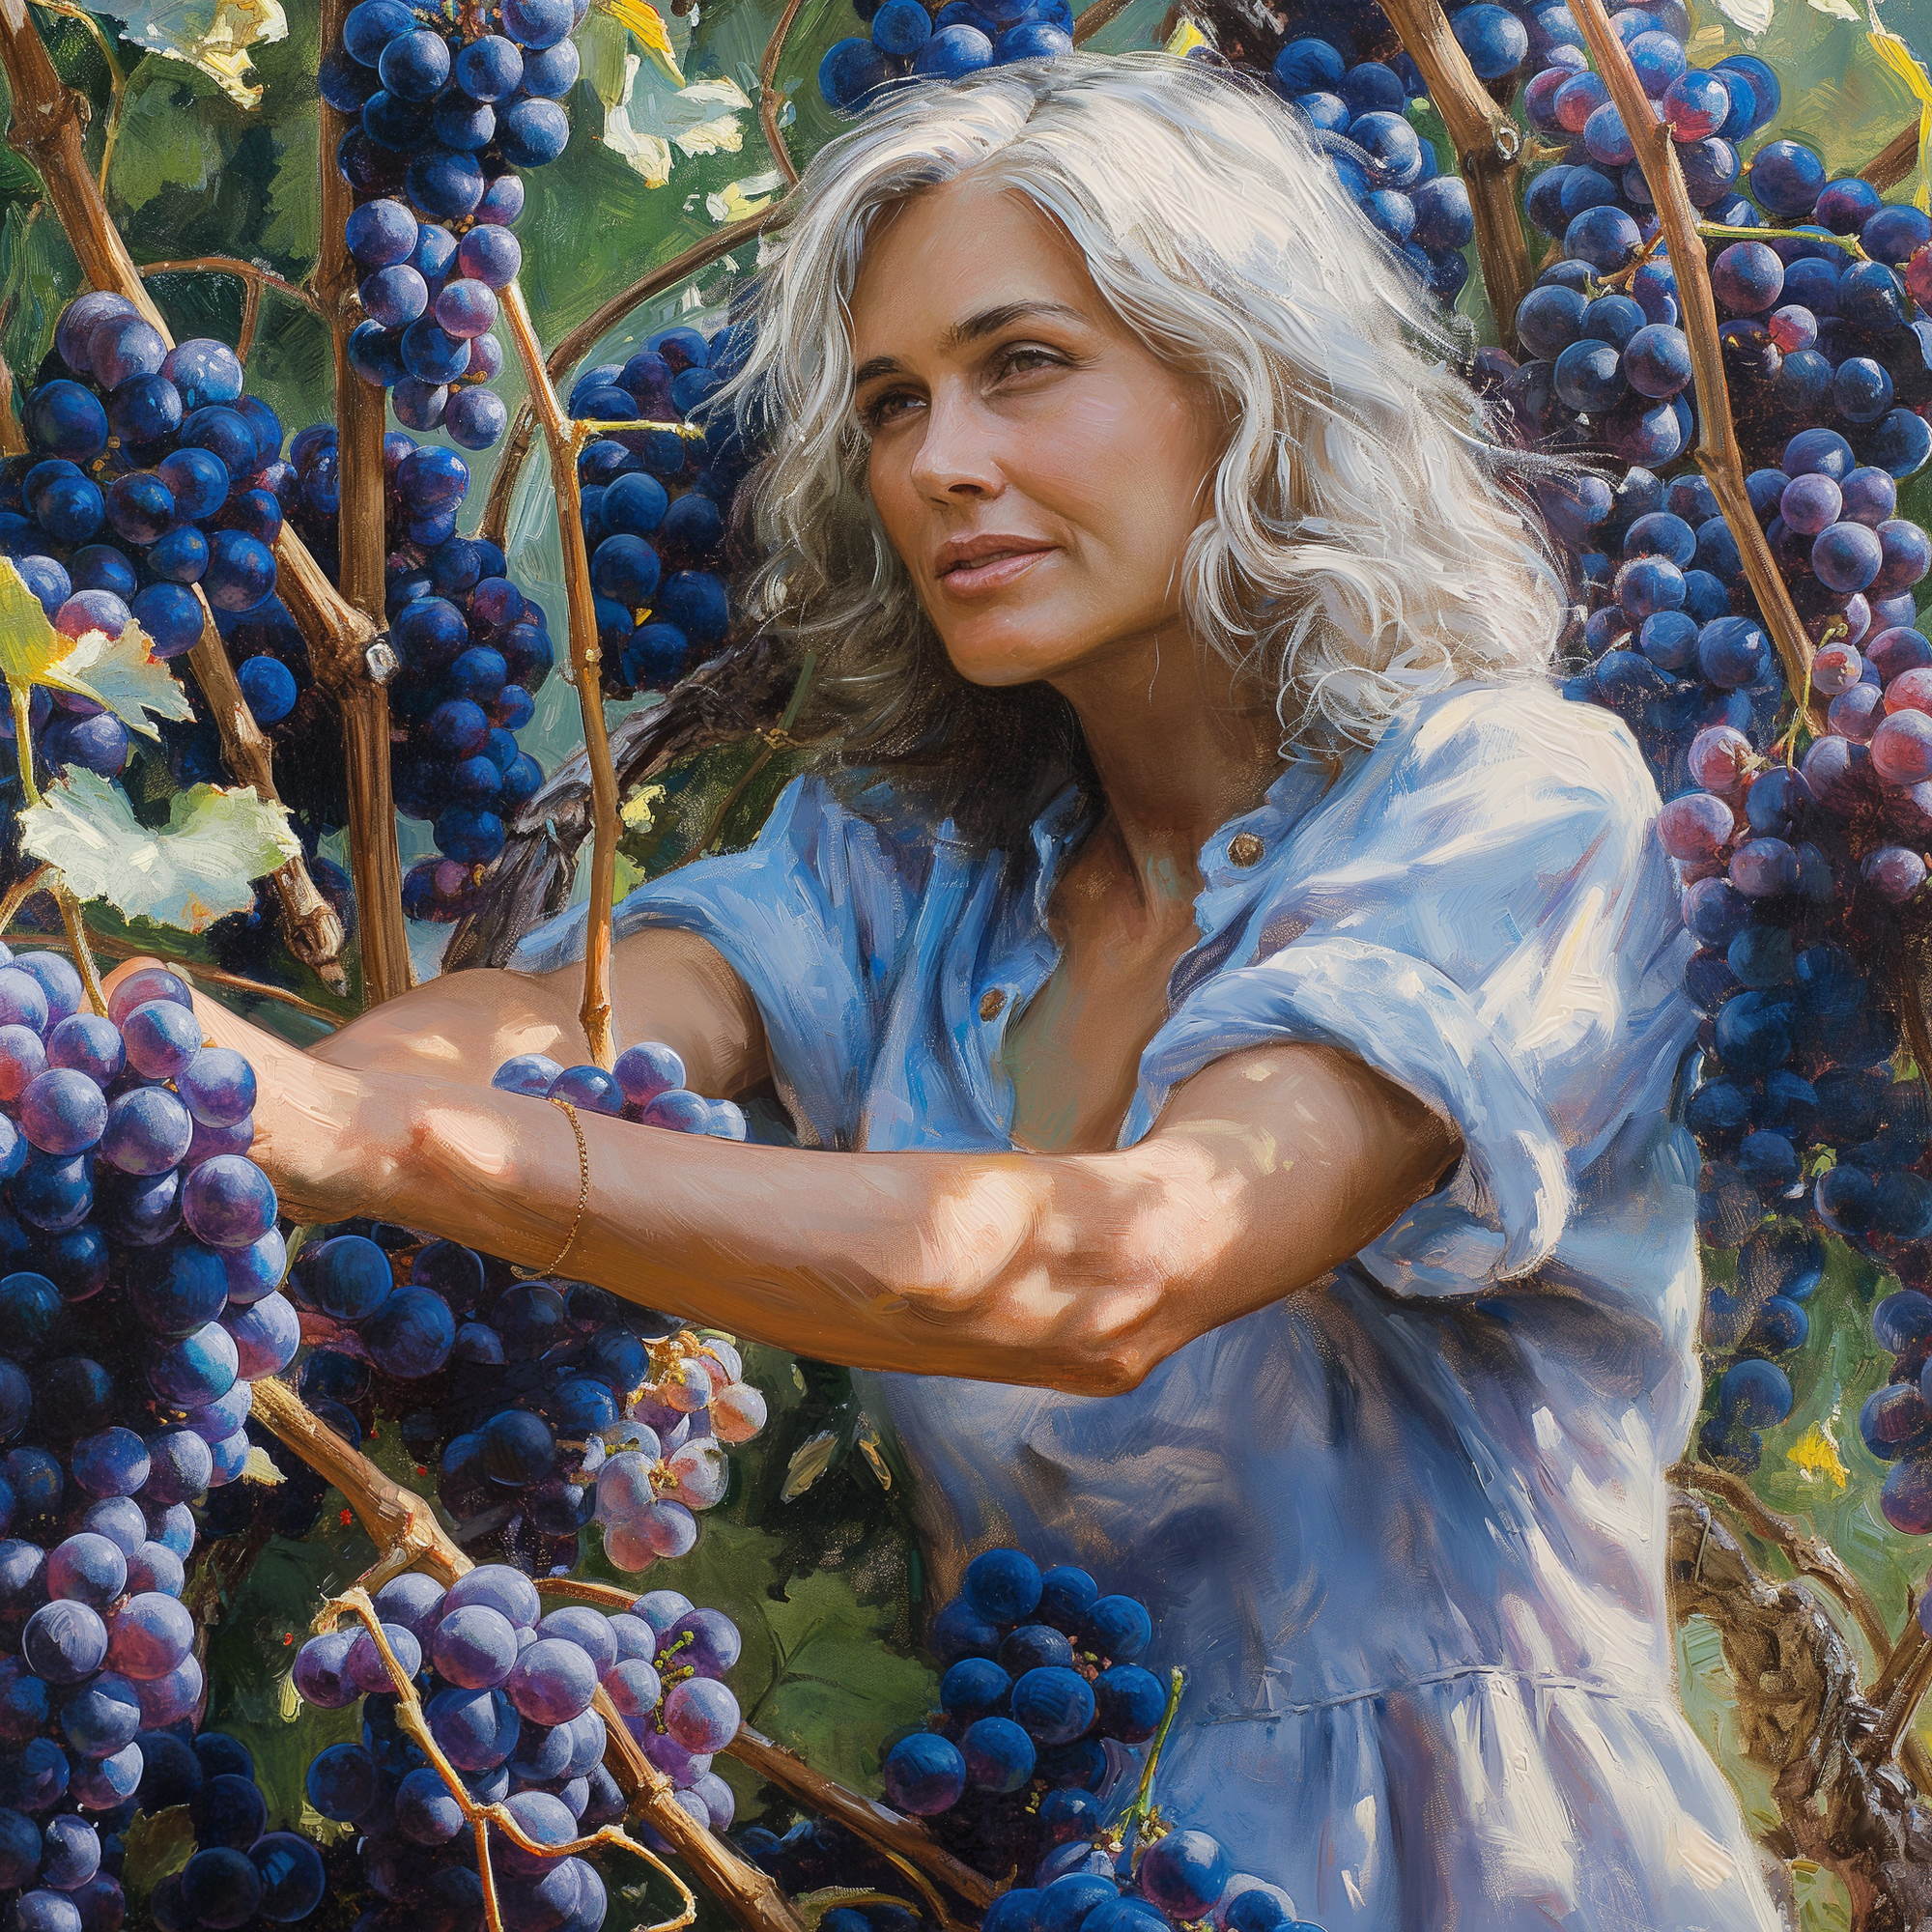 an image of a woman picking grapes for grape seed extract.